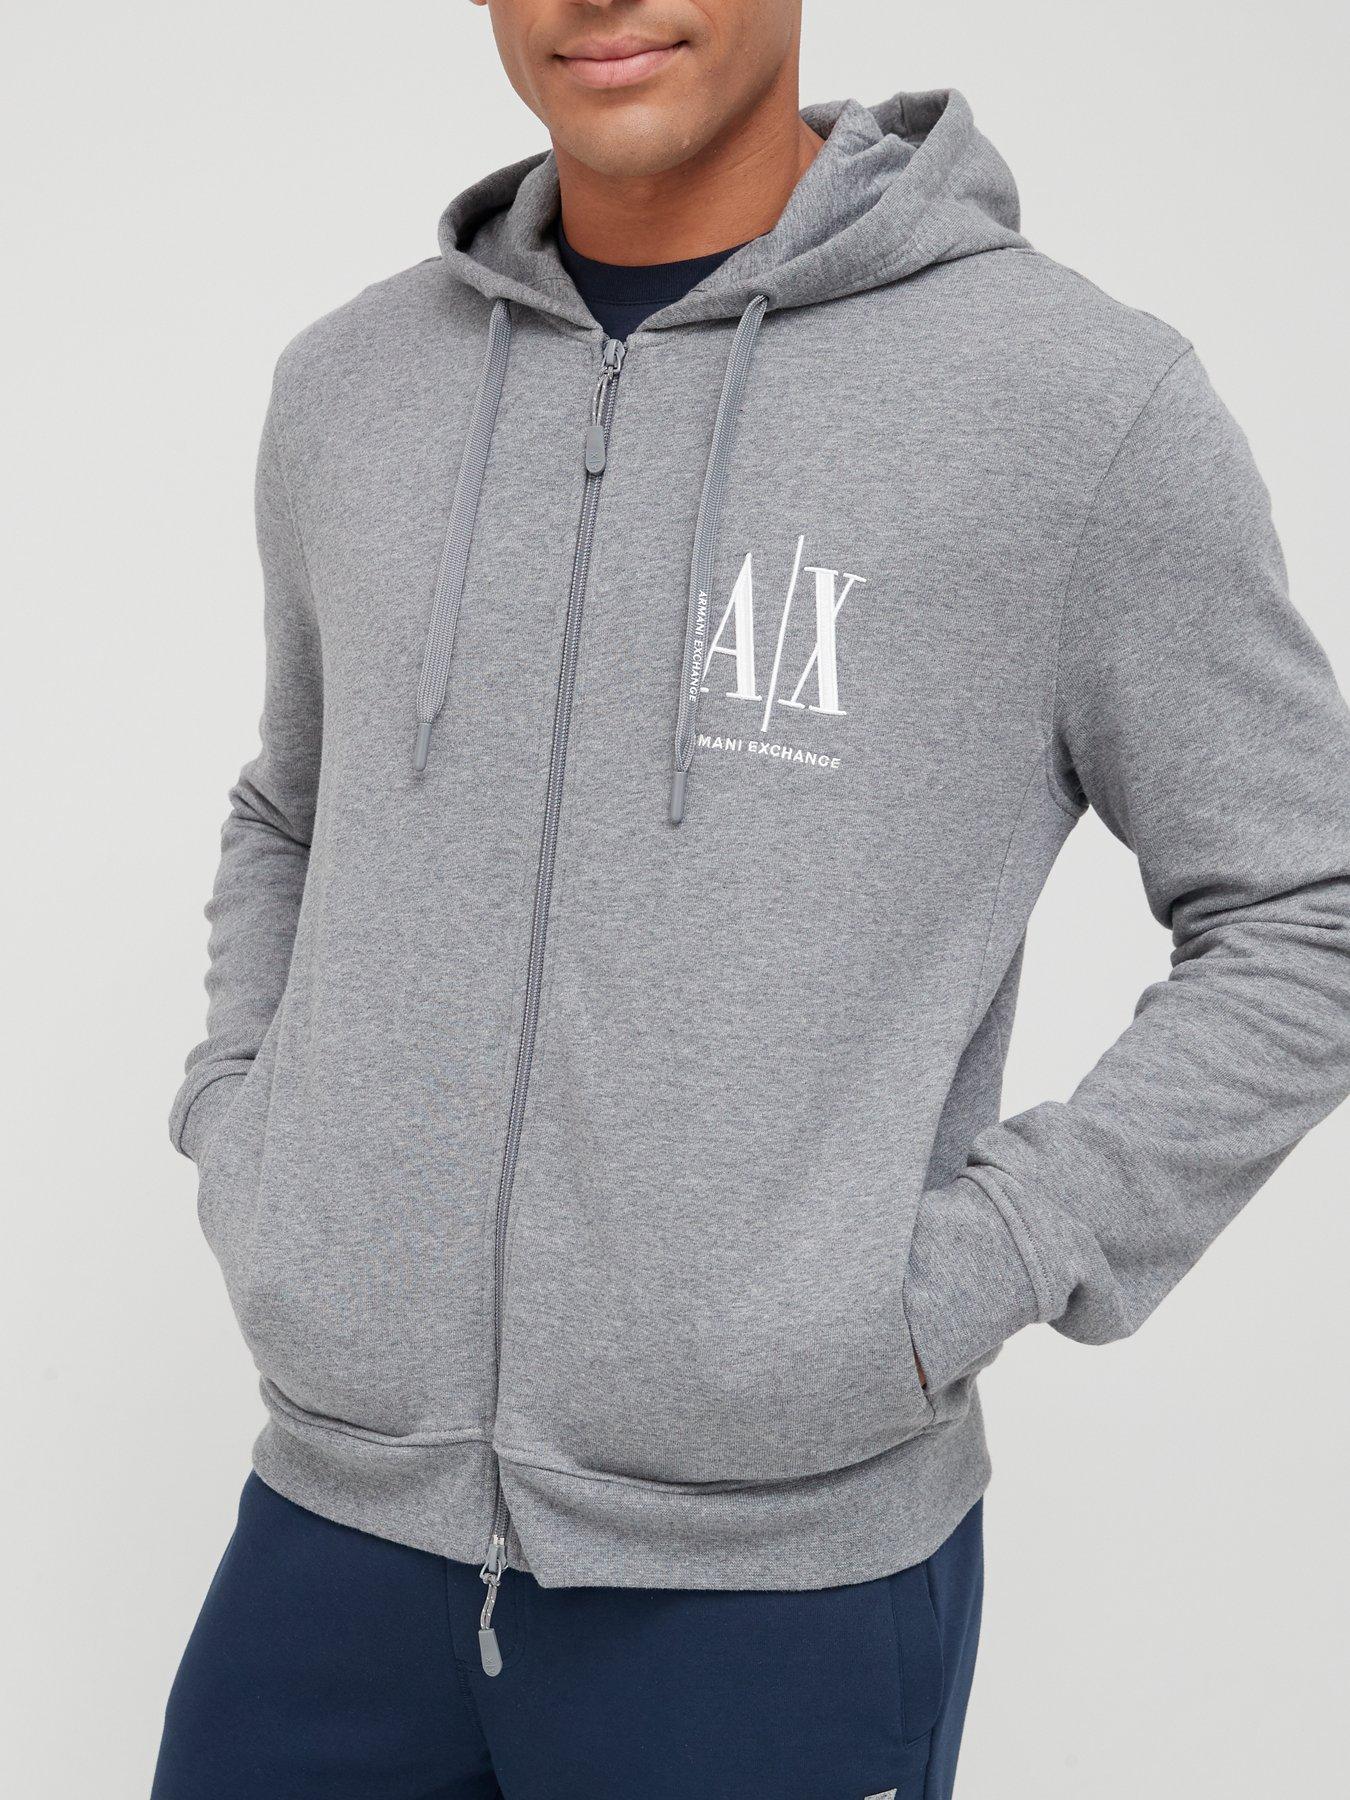 for Men Armani Exchange Fleece Hooded Sweatshirt in Grey Mens Activewear gym and workout clothes Armani Exchange Activewear Grey gym and workout clothes 